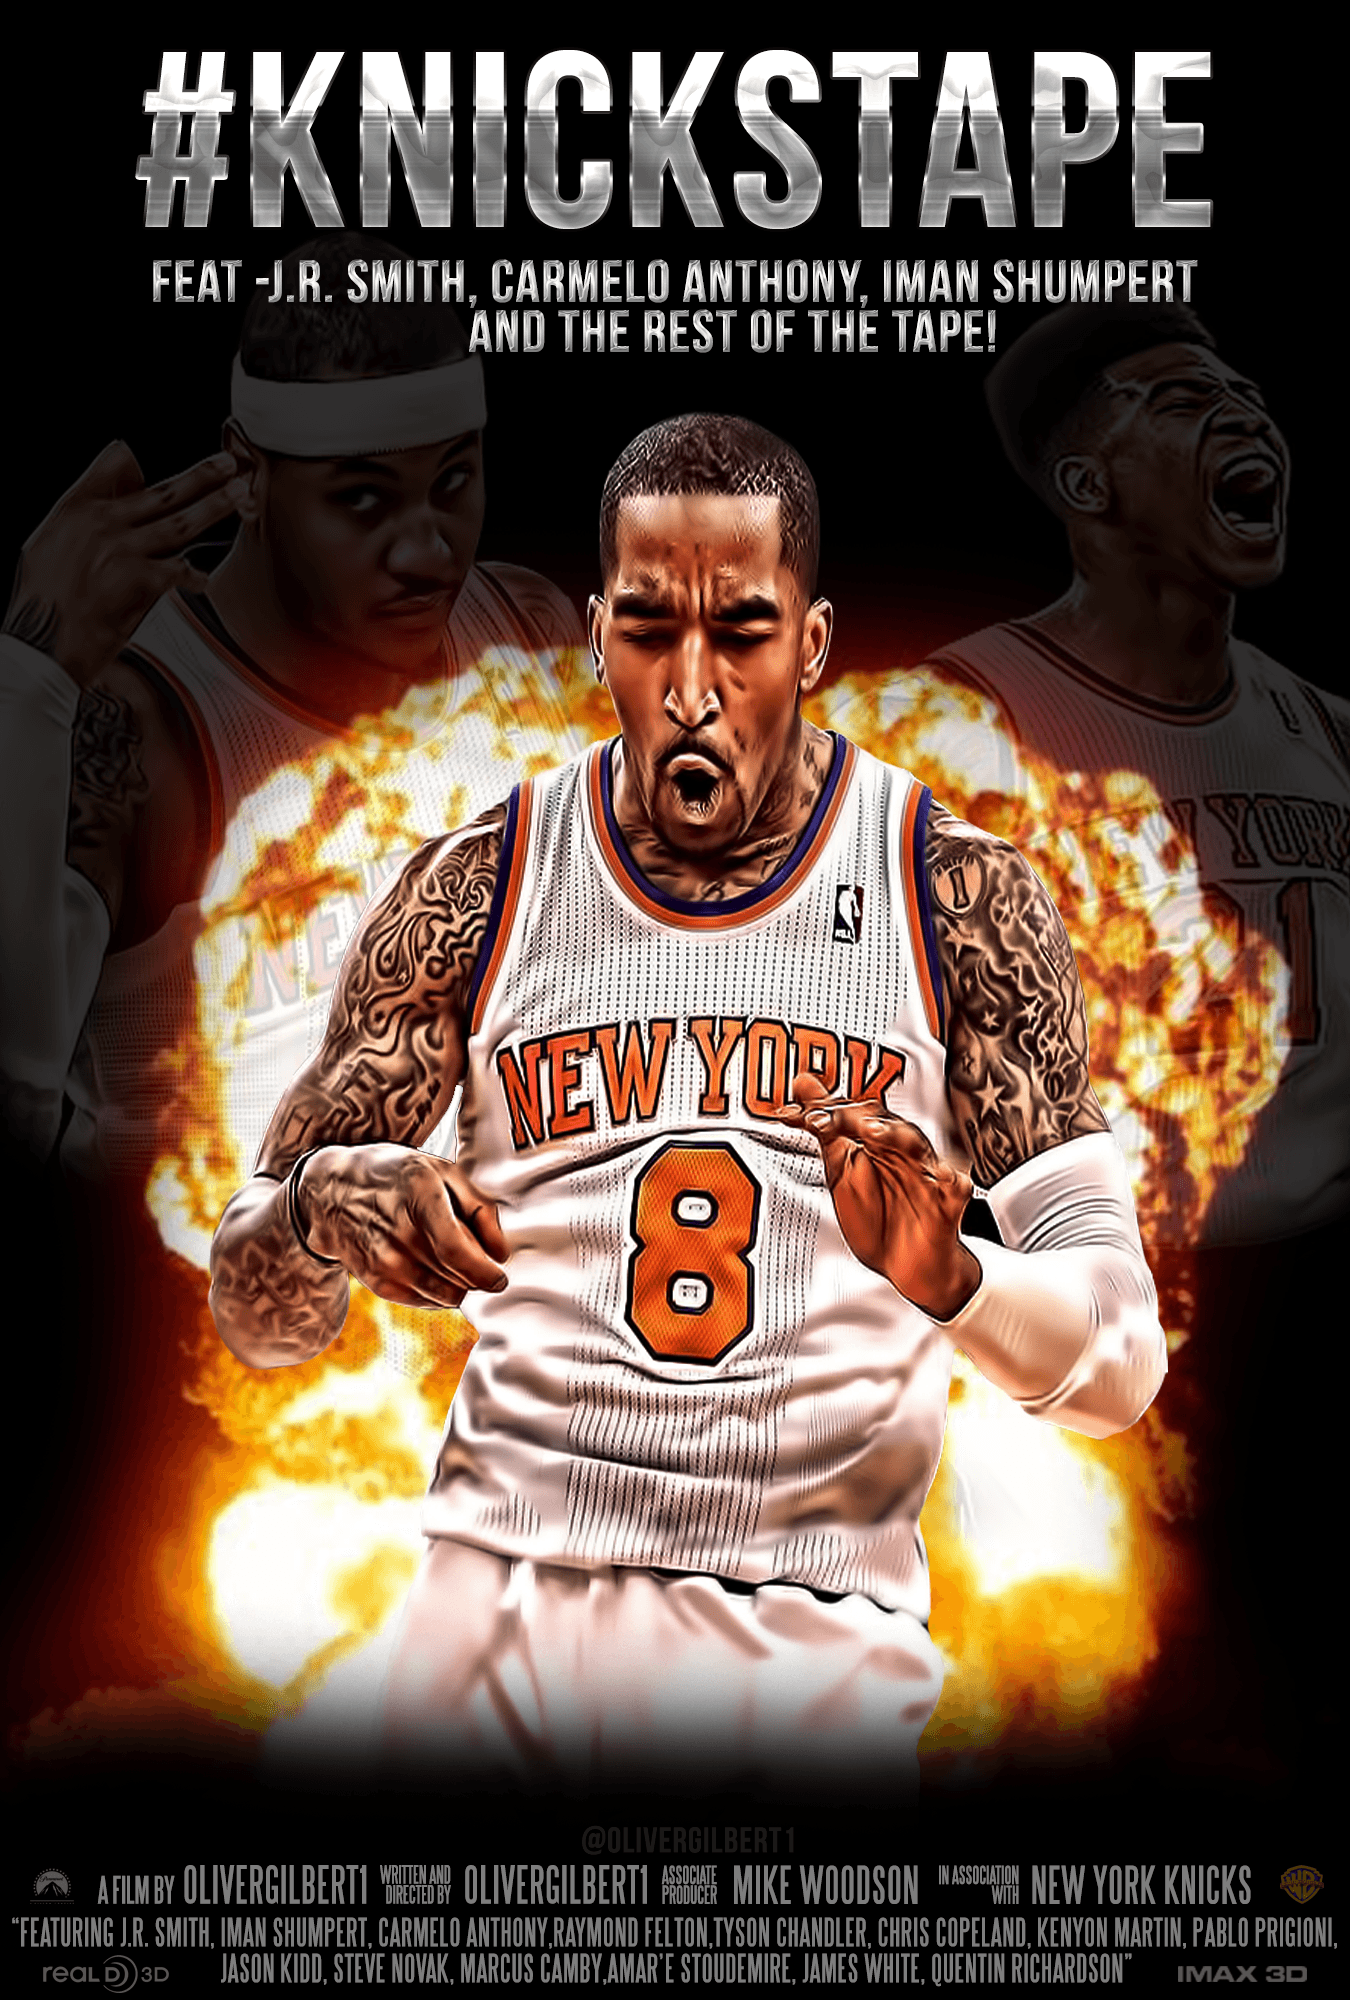 J. R. Smith 6th Player Of The Year 2013 1920×1200 Wallpaper